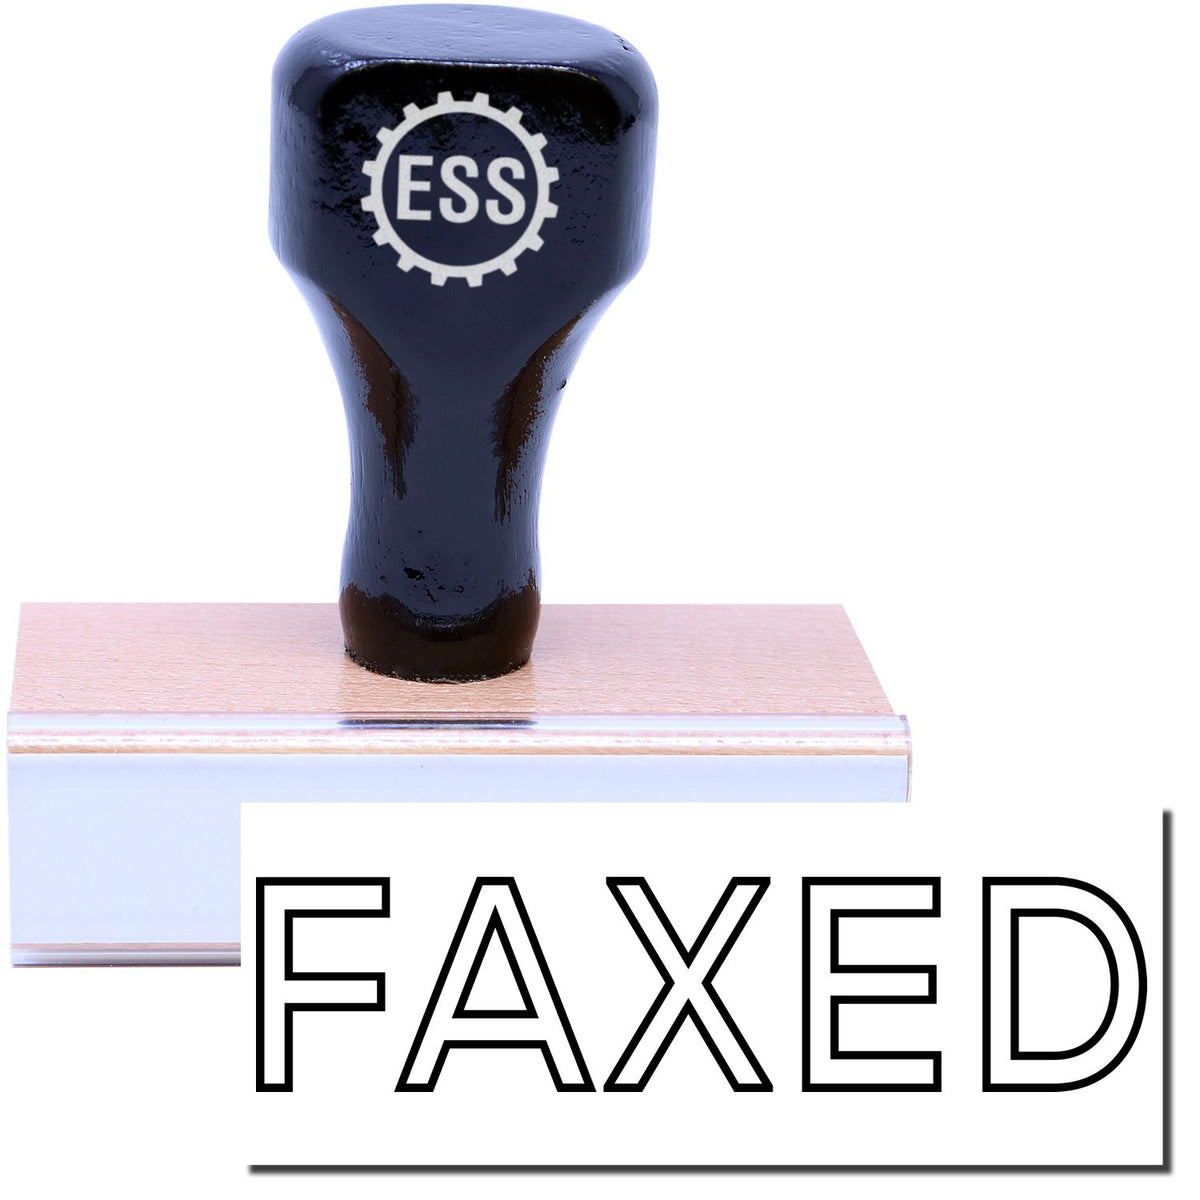 A stock office rubber stamp with a stamped image showing how the text &quot;FAXED&quot; in an outline font is displayed after stamping.